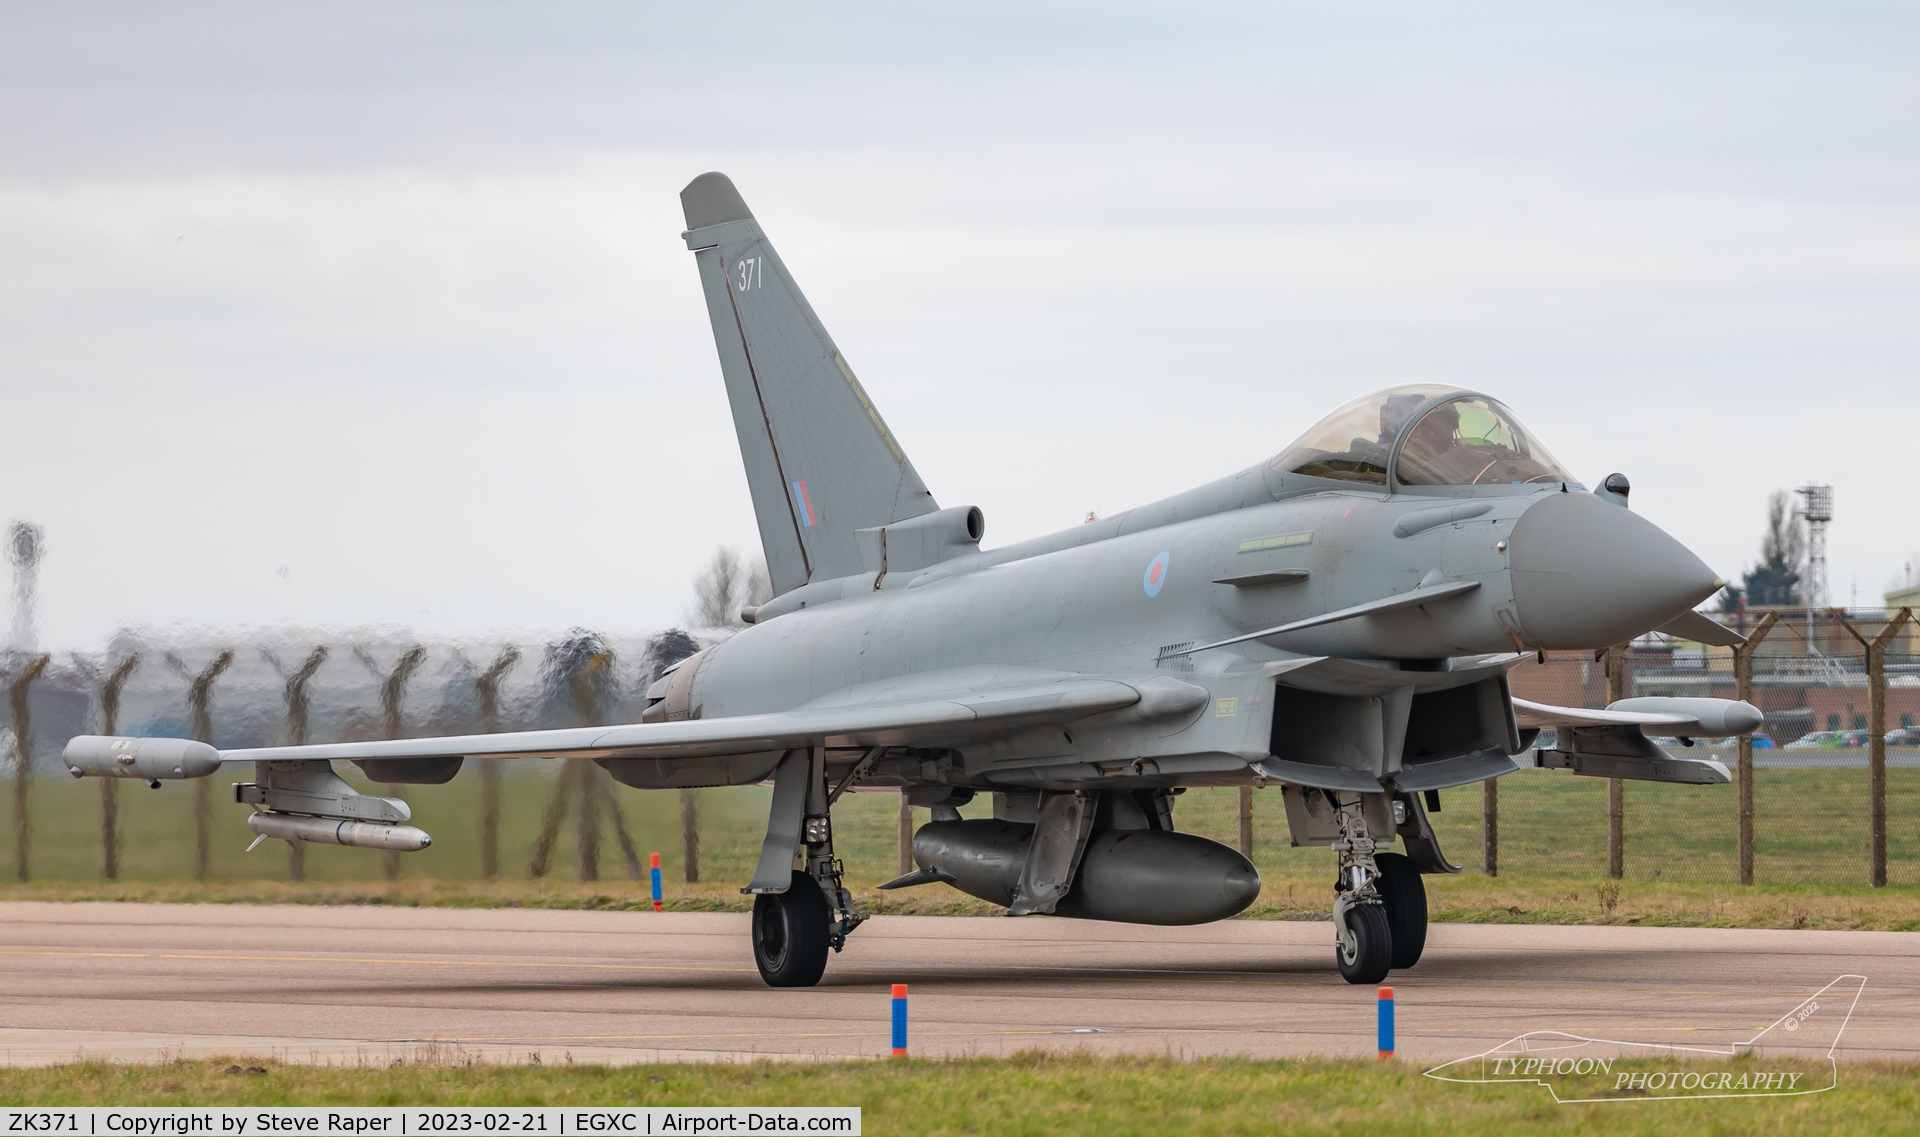 ZK371, 2016 Eurofighter Typhoon FGR.4 C/N BS133, Bravo taxiway at Coningsby for a rwy 25 departure